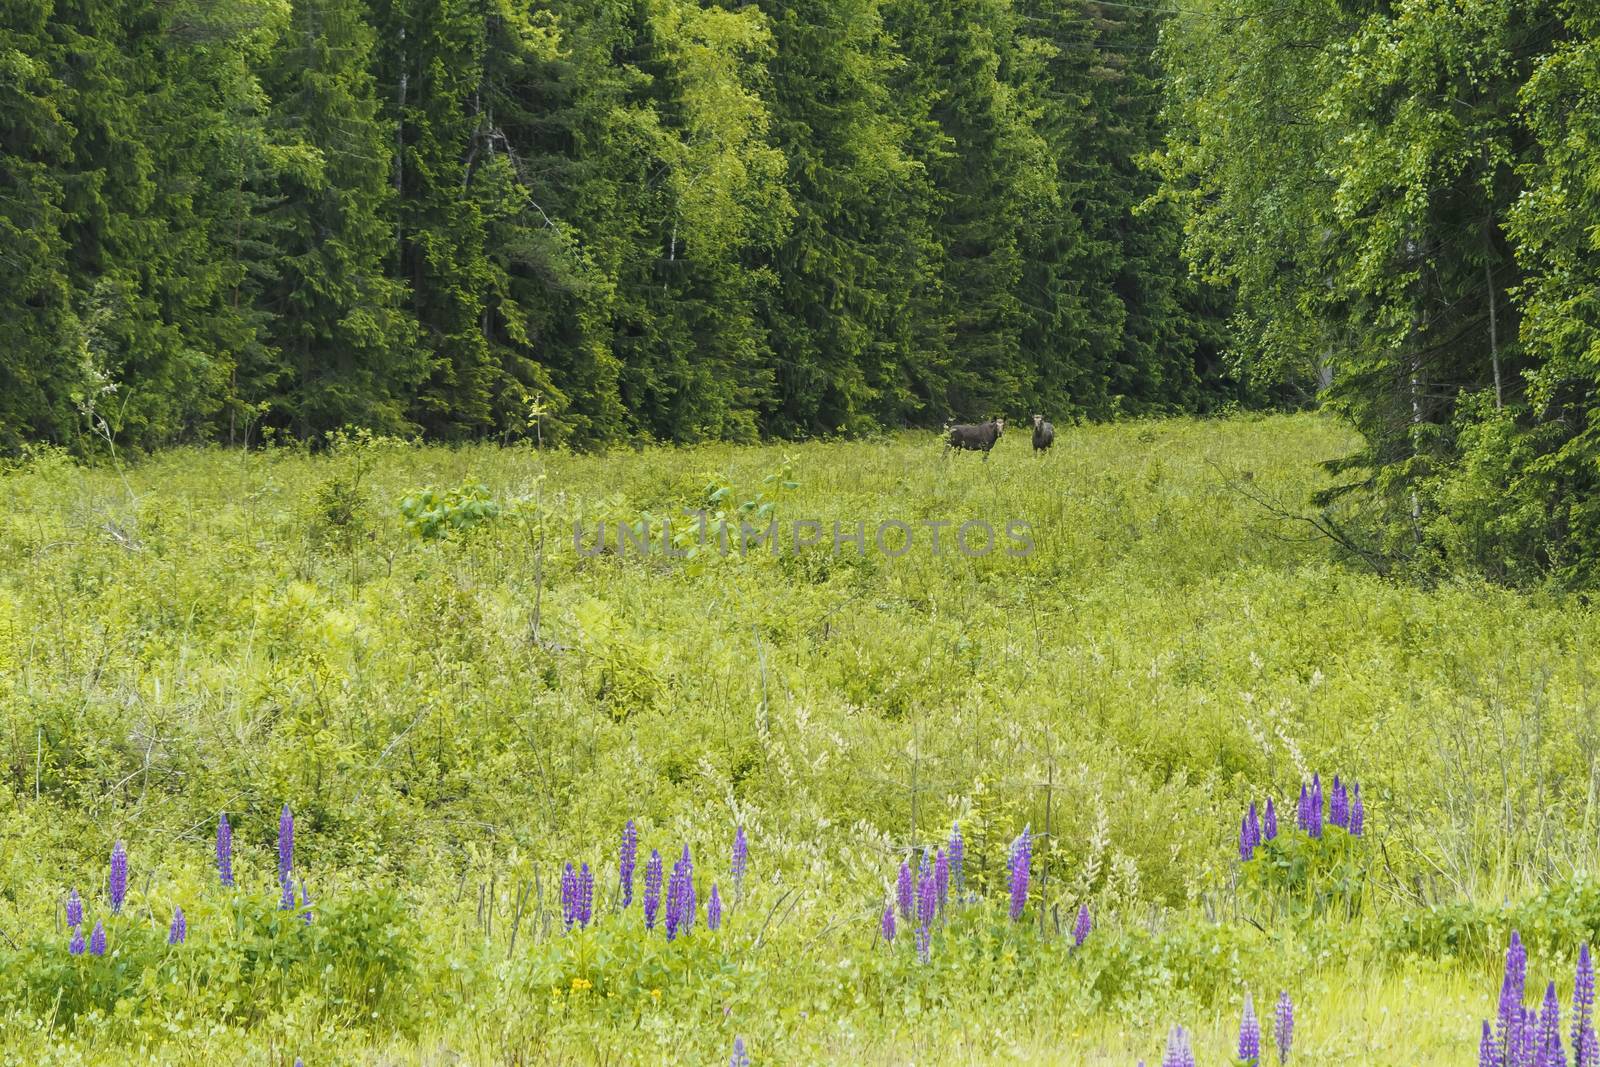 Elk family in a forest glade.